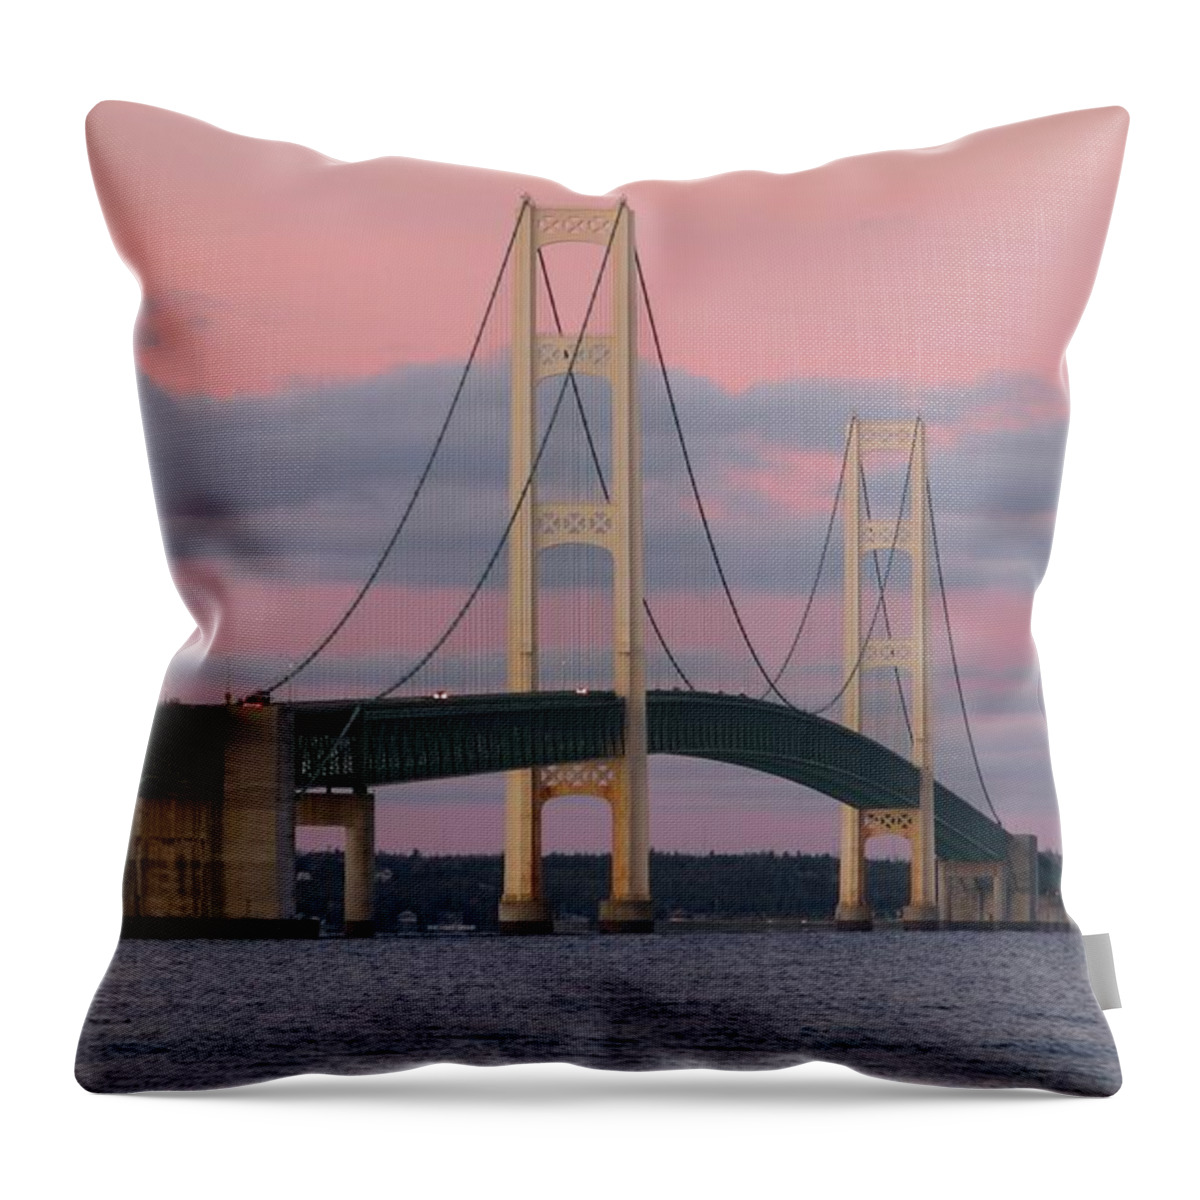 Mackinac Bridge Throw Pillow featuring the photograph Under a Rose Colored Sky by Keith Stokes